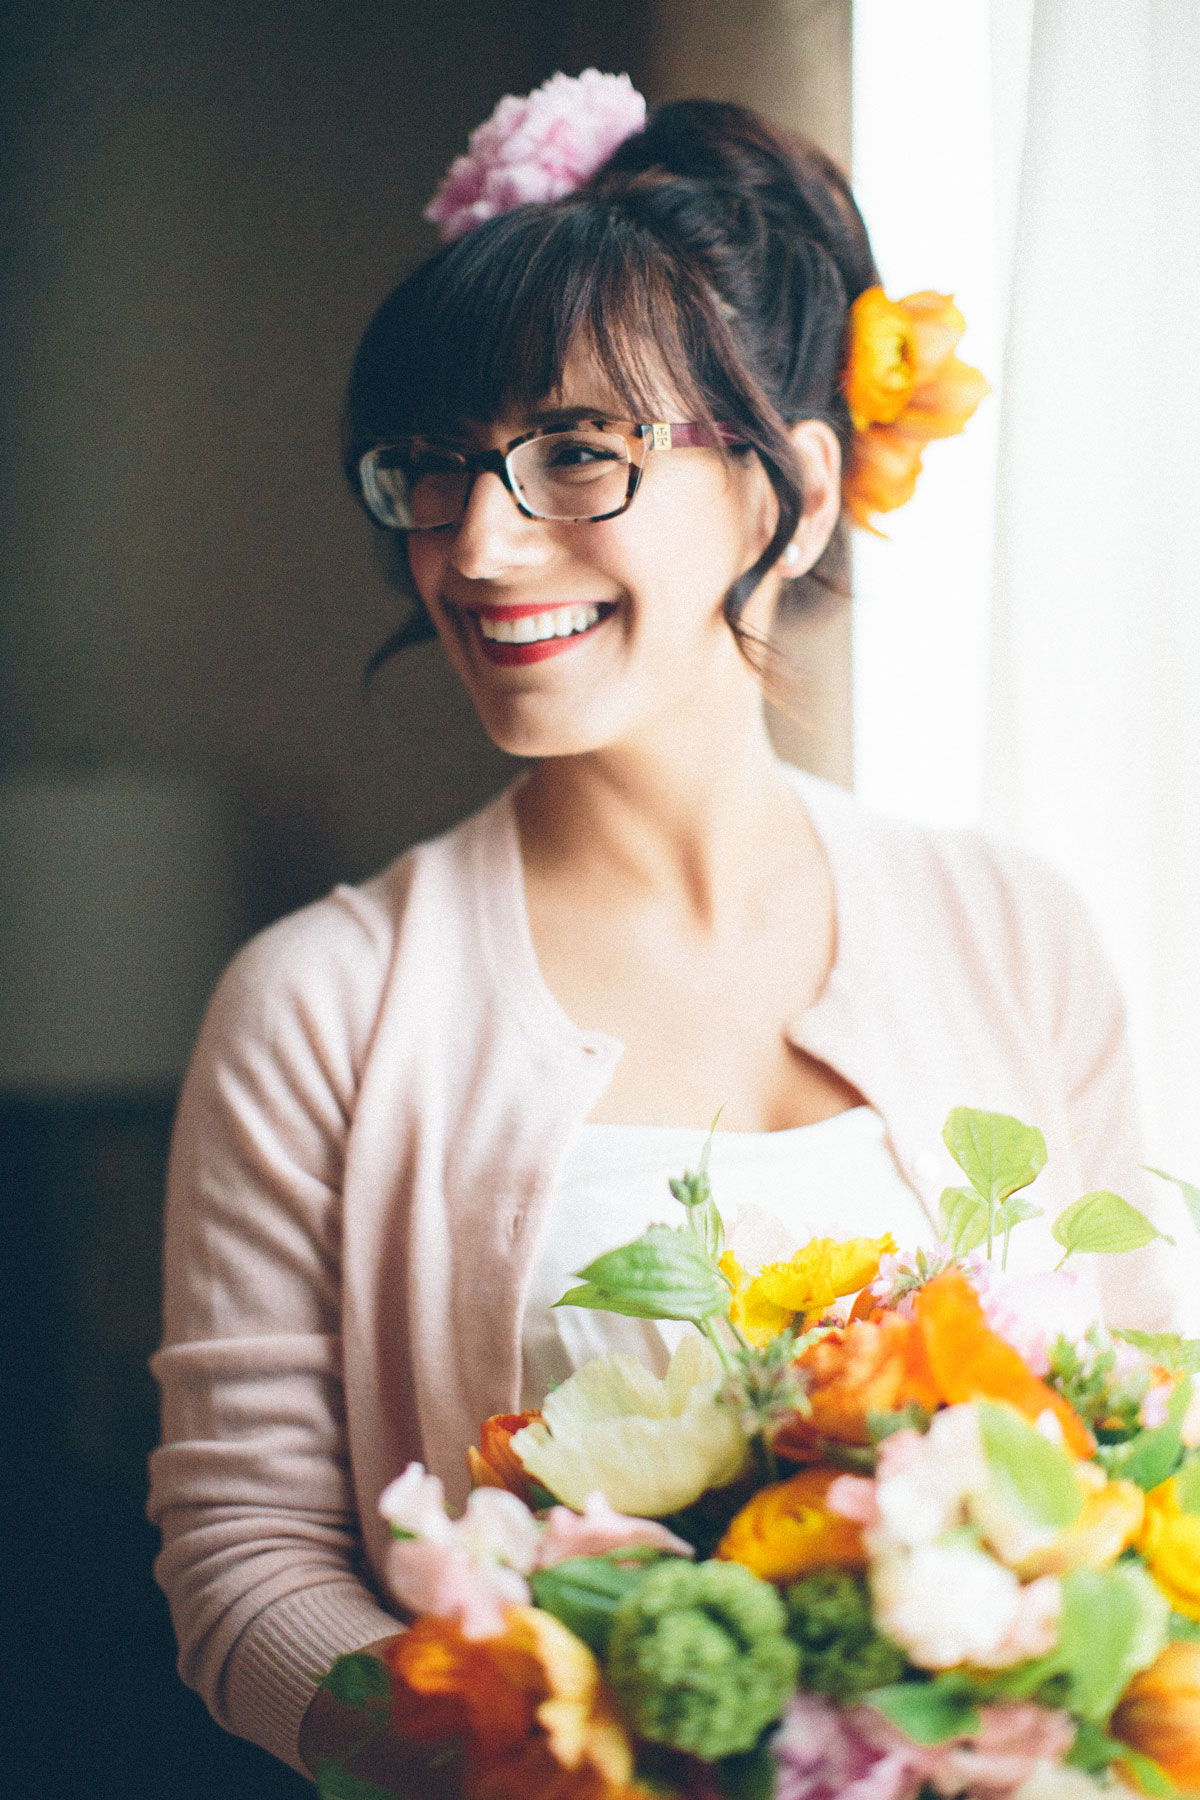 Portrait of a Boston Bride wearing a pink cardigan and orange flowers in her updo